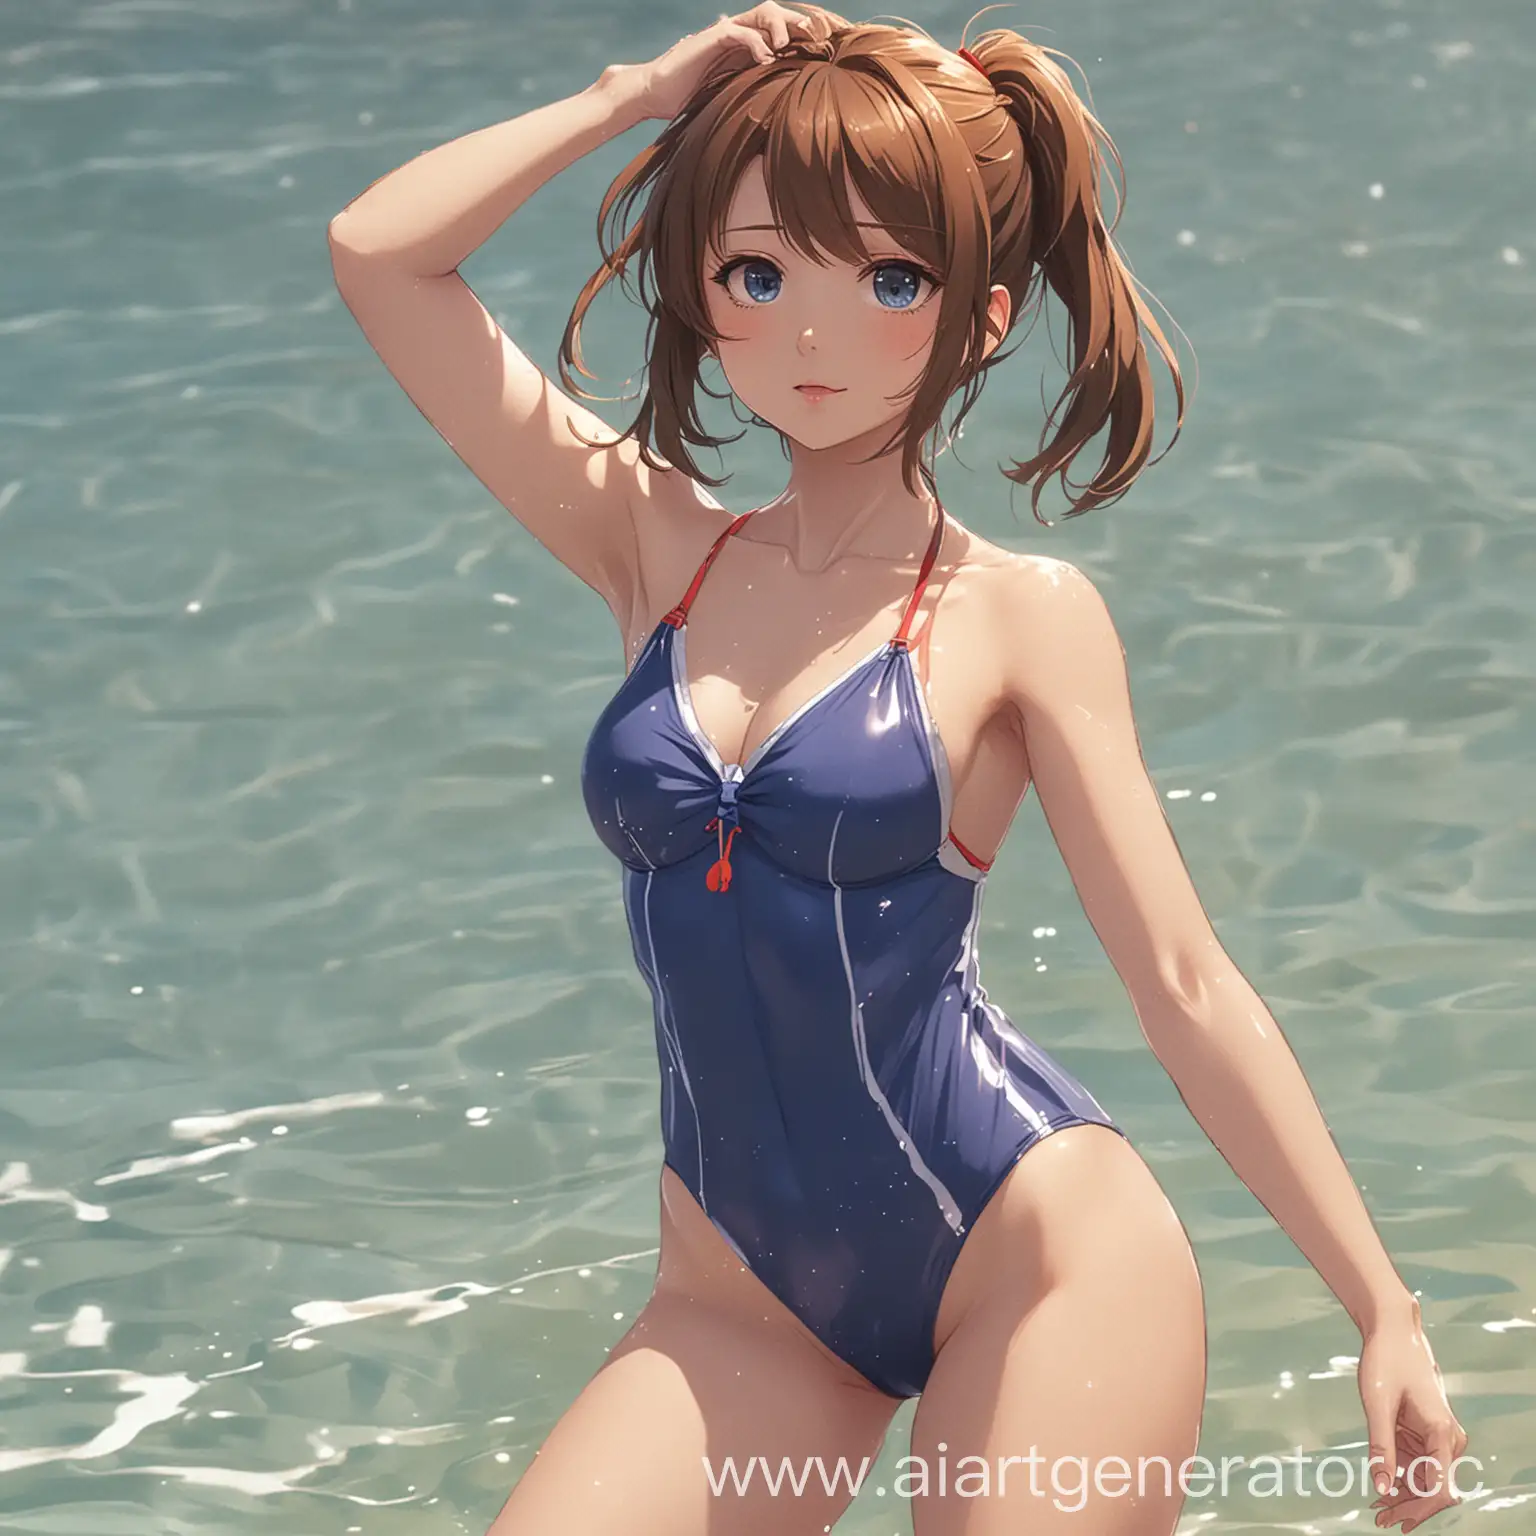 Adorable-Anime-Girl-Enjoying-Beach-Day-in-Colorful-Swimsuit